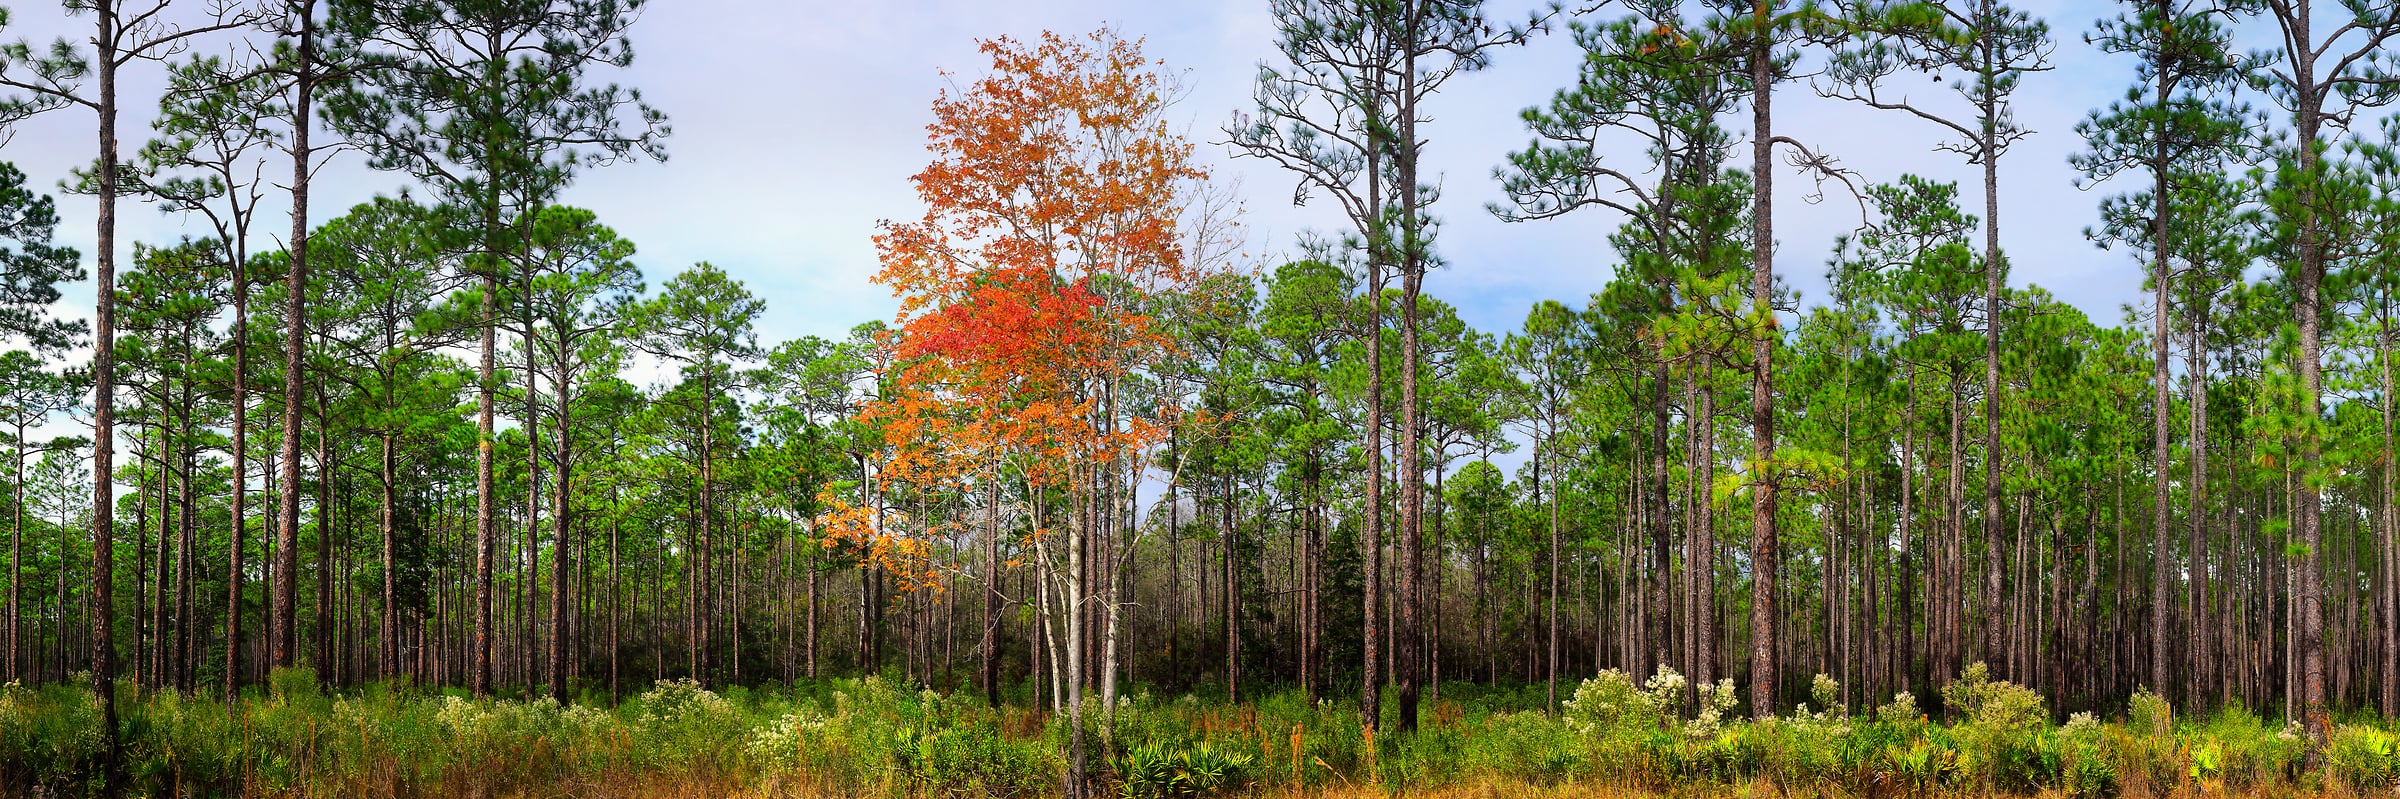 441 megapixels! A very high resolution, large-format VAST photo print of a forest with one autumn tree; nature photograph created by Phil Crawshay in Cary State Forest, Bryceville, Florida.